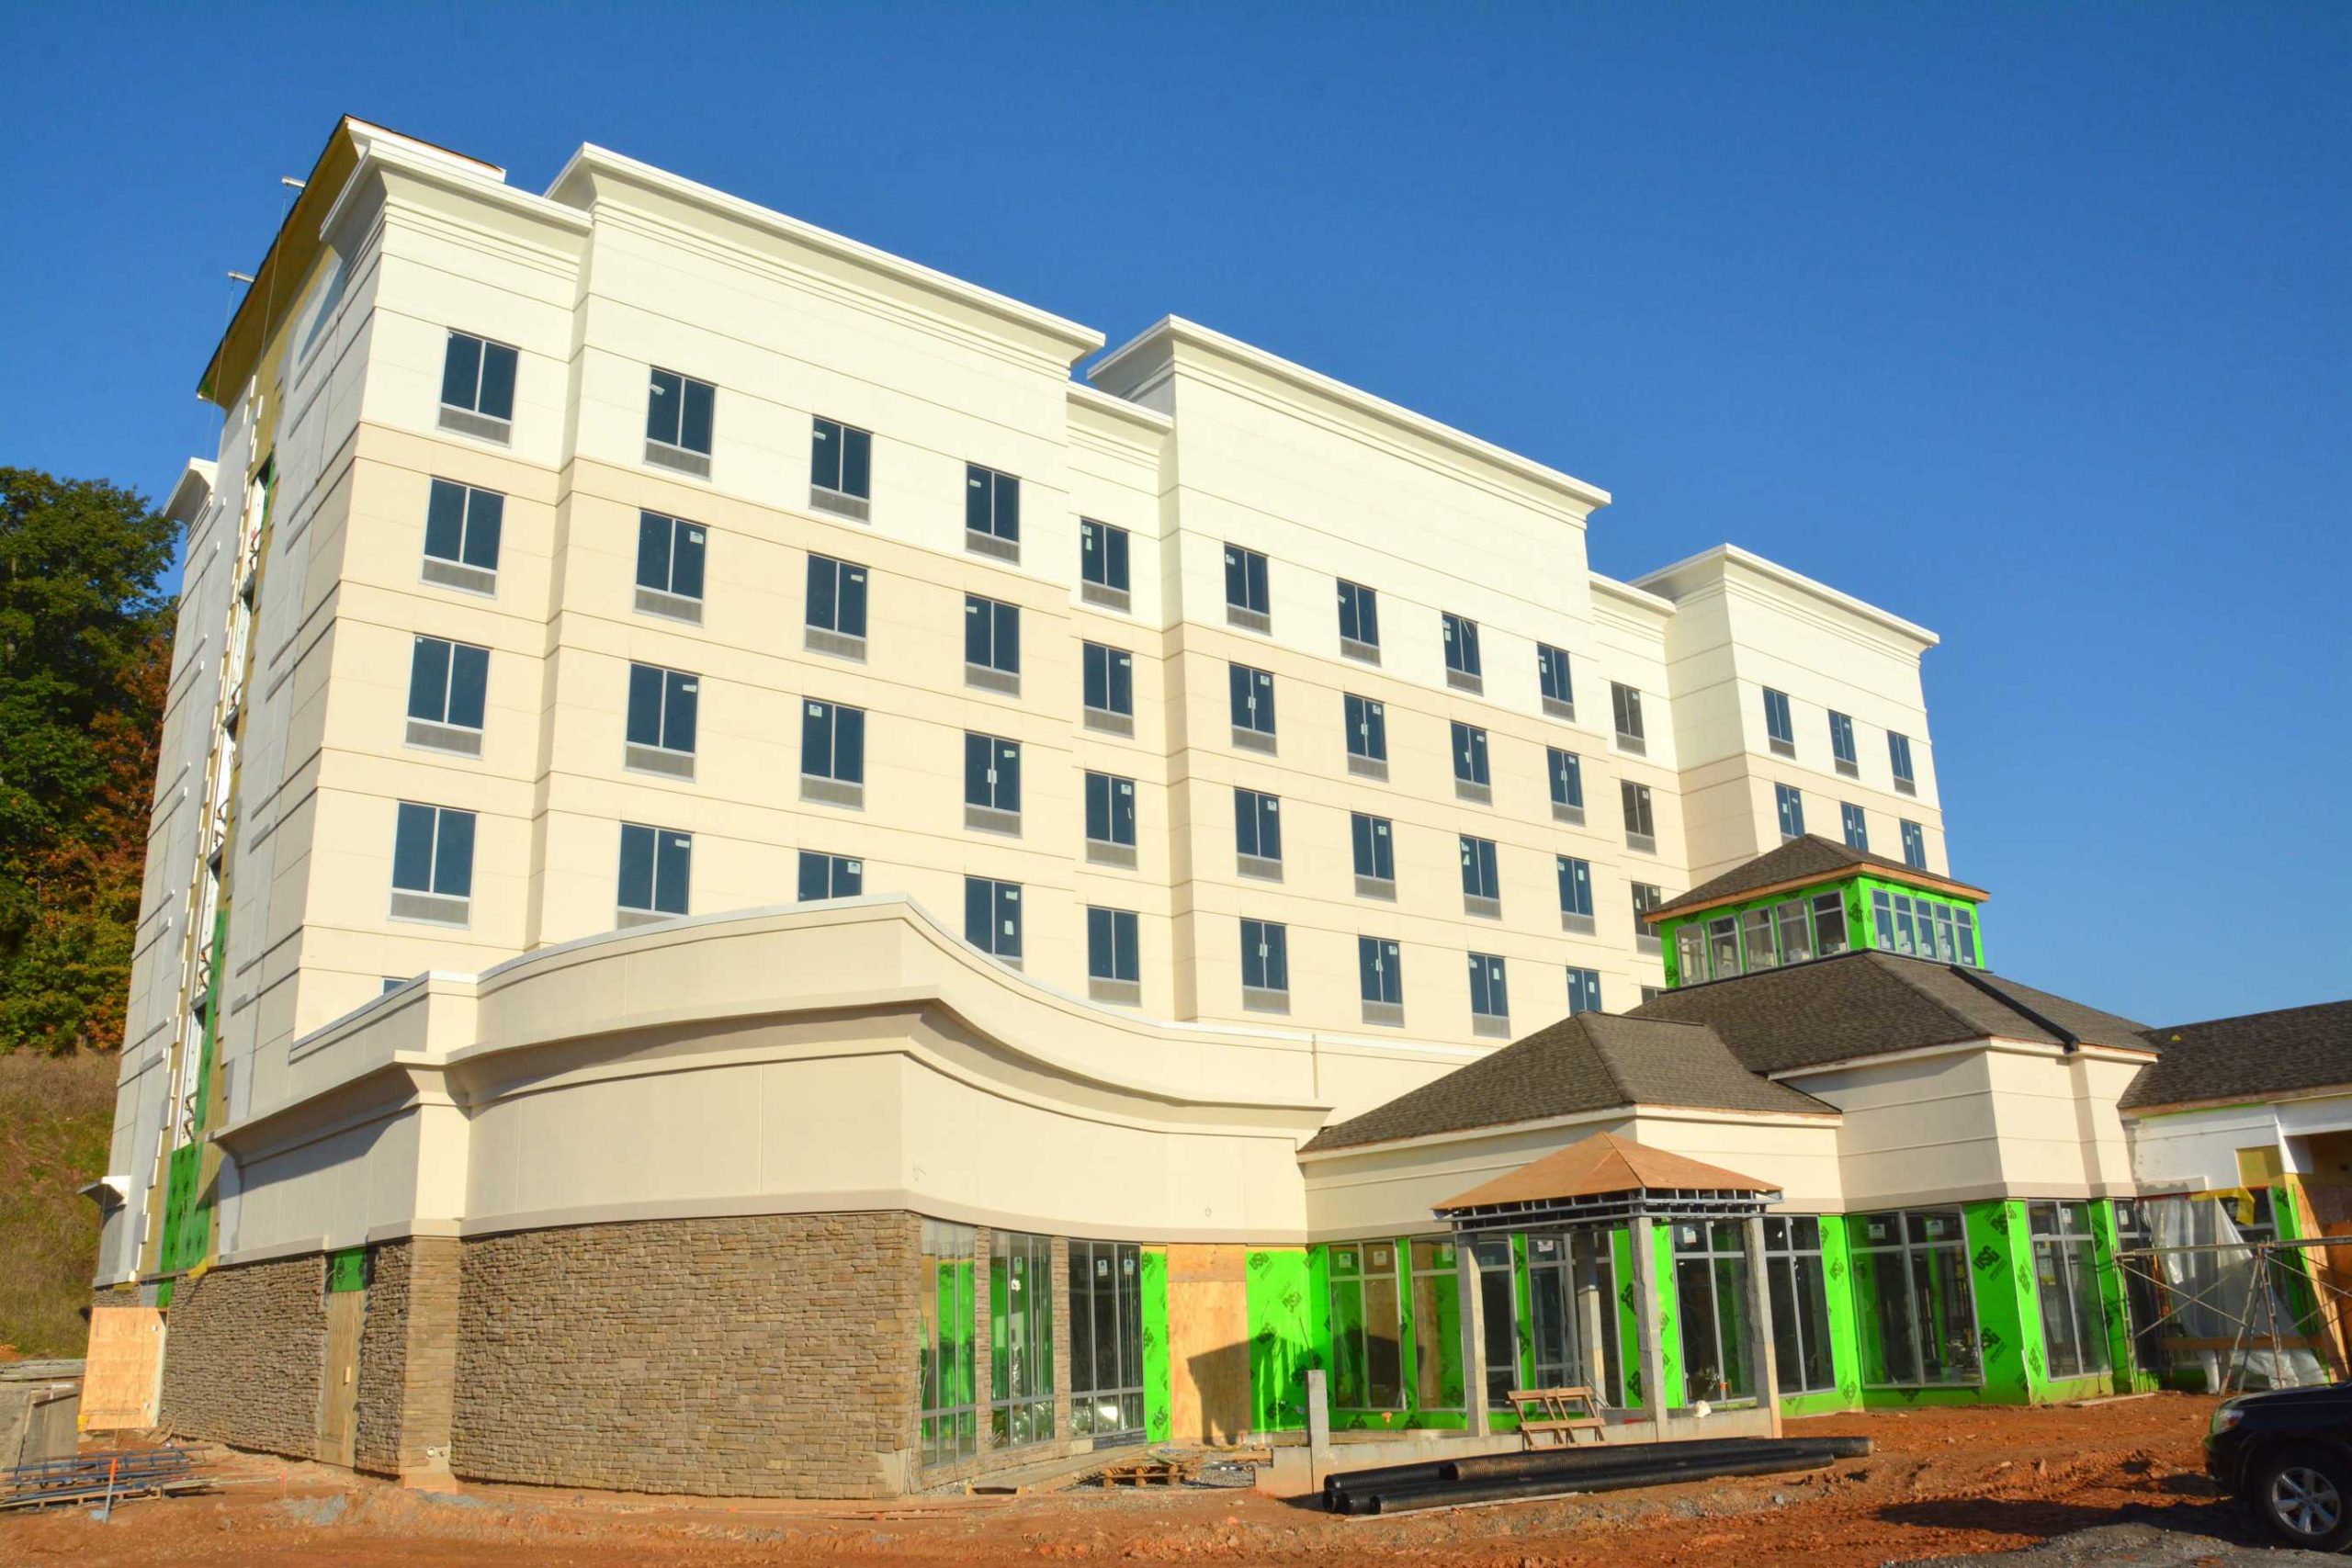 Exterior construction view of South Carolina New Hotel Construction Contractors MEP Painting & Wallcoverings